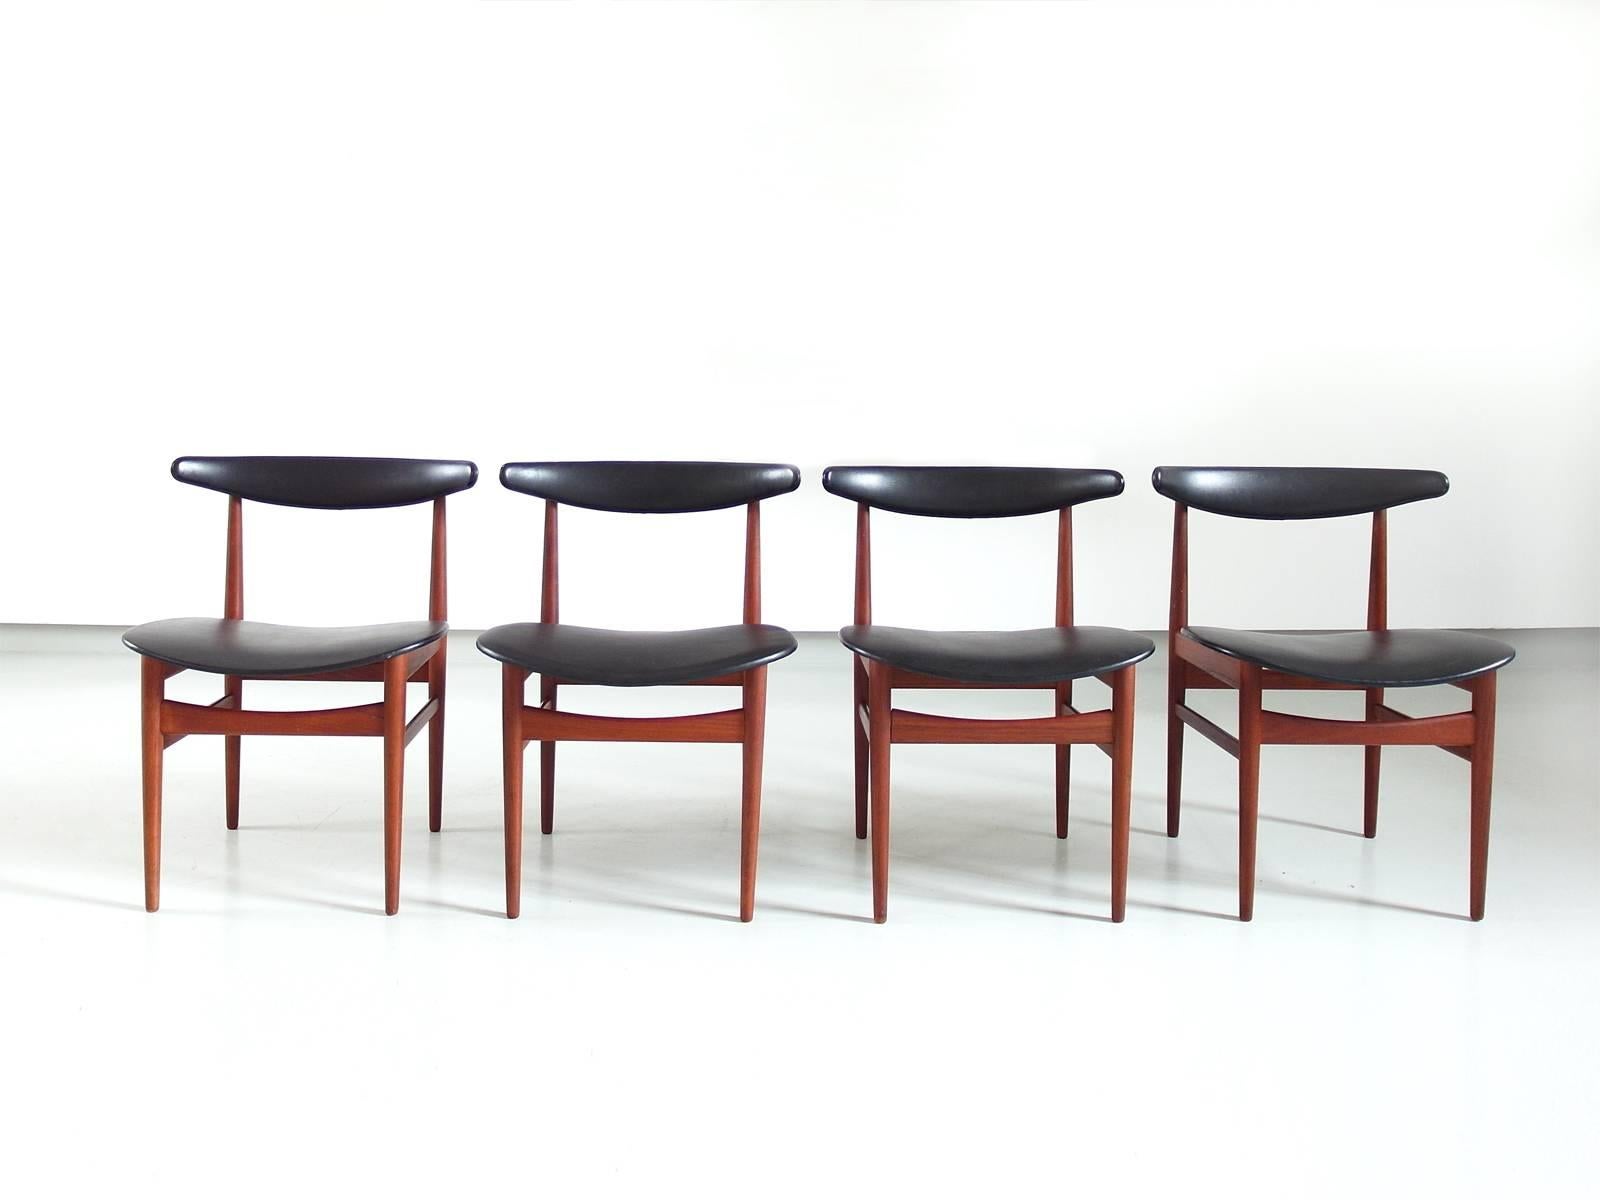 Beautiful Danish Modern dining room chairs Model 218A attributed to Poul Hundevad for Vamdrup Stolefabrik, Denmark, 1965. This set of four compass-back chairs in teak delivers a simple yet marvellous sophistication.
Exquisite style from the height